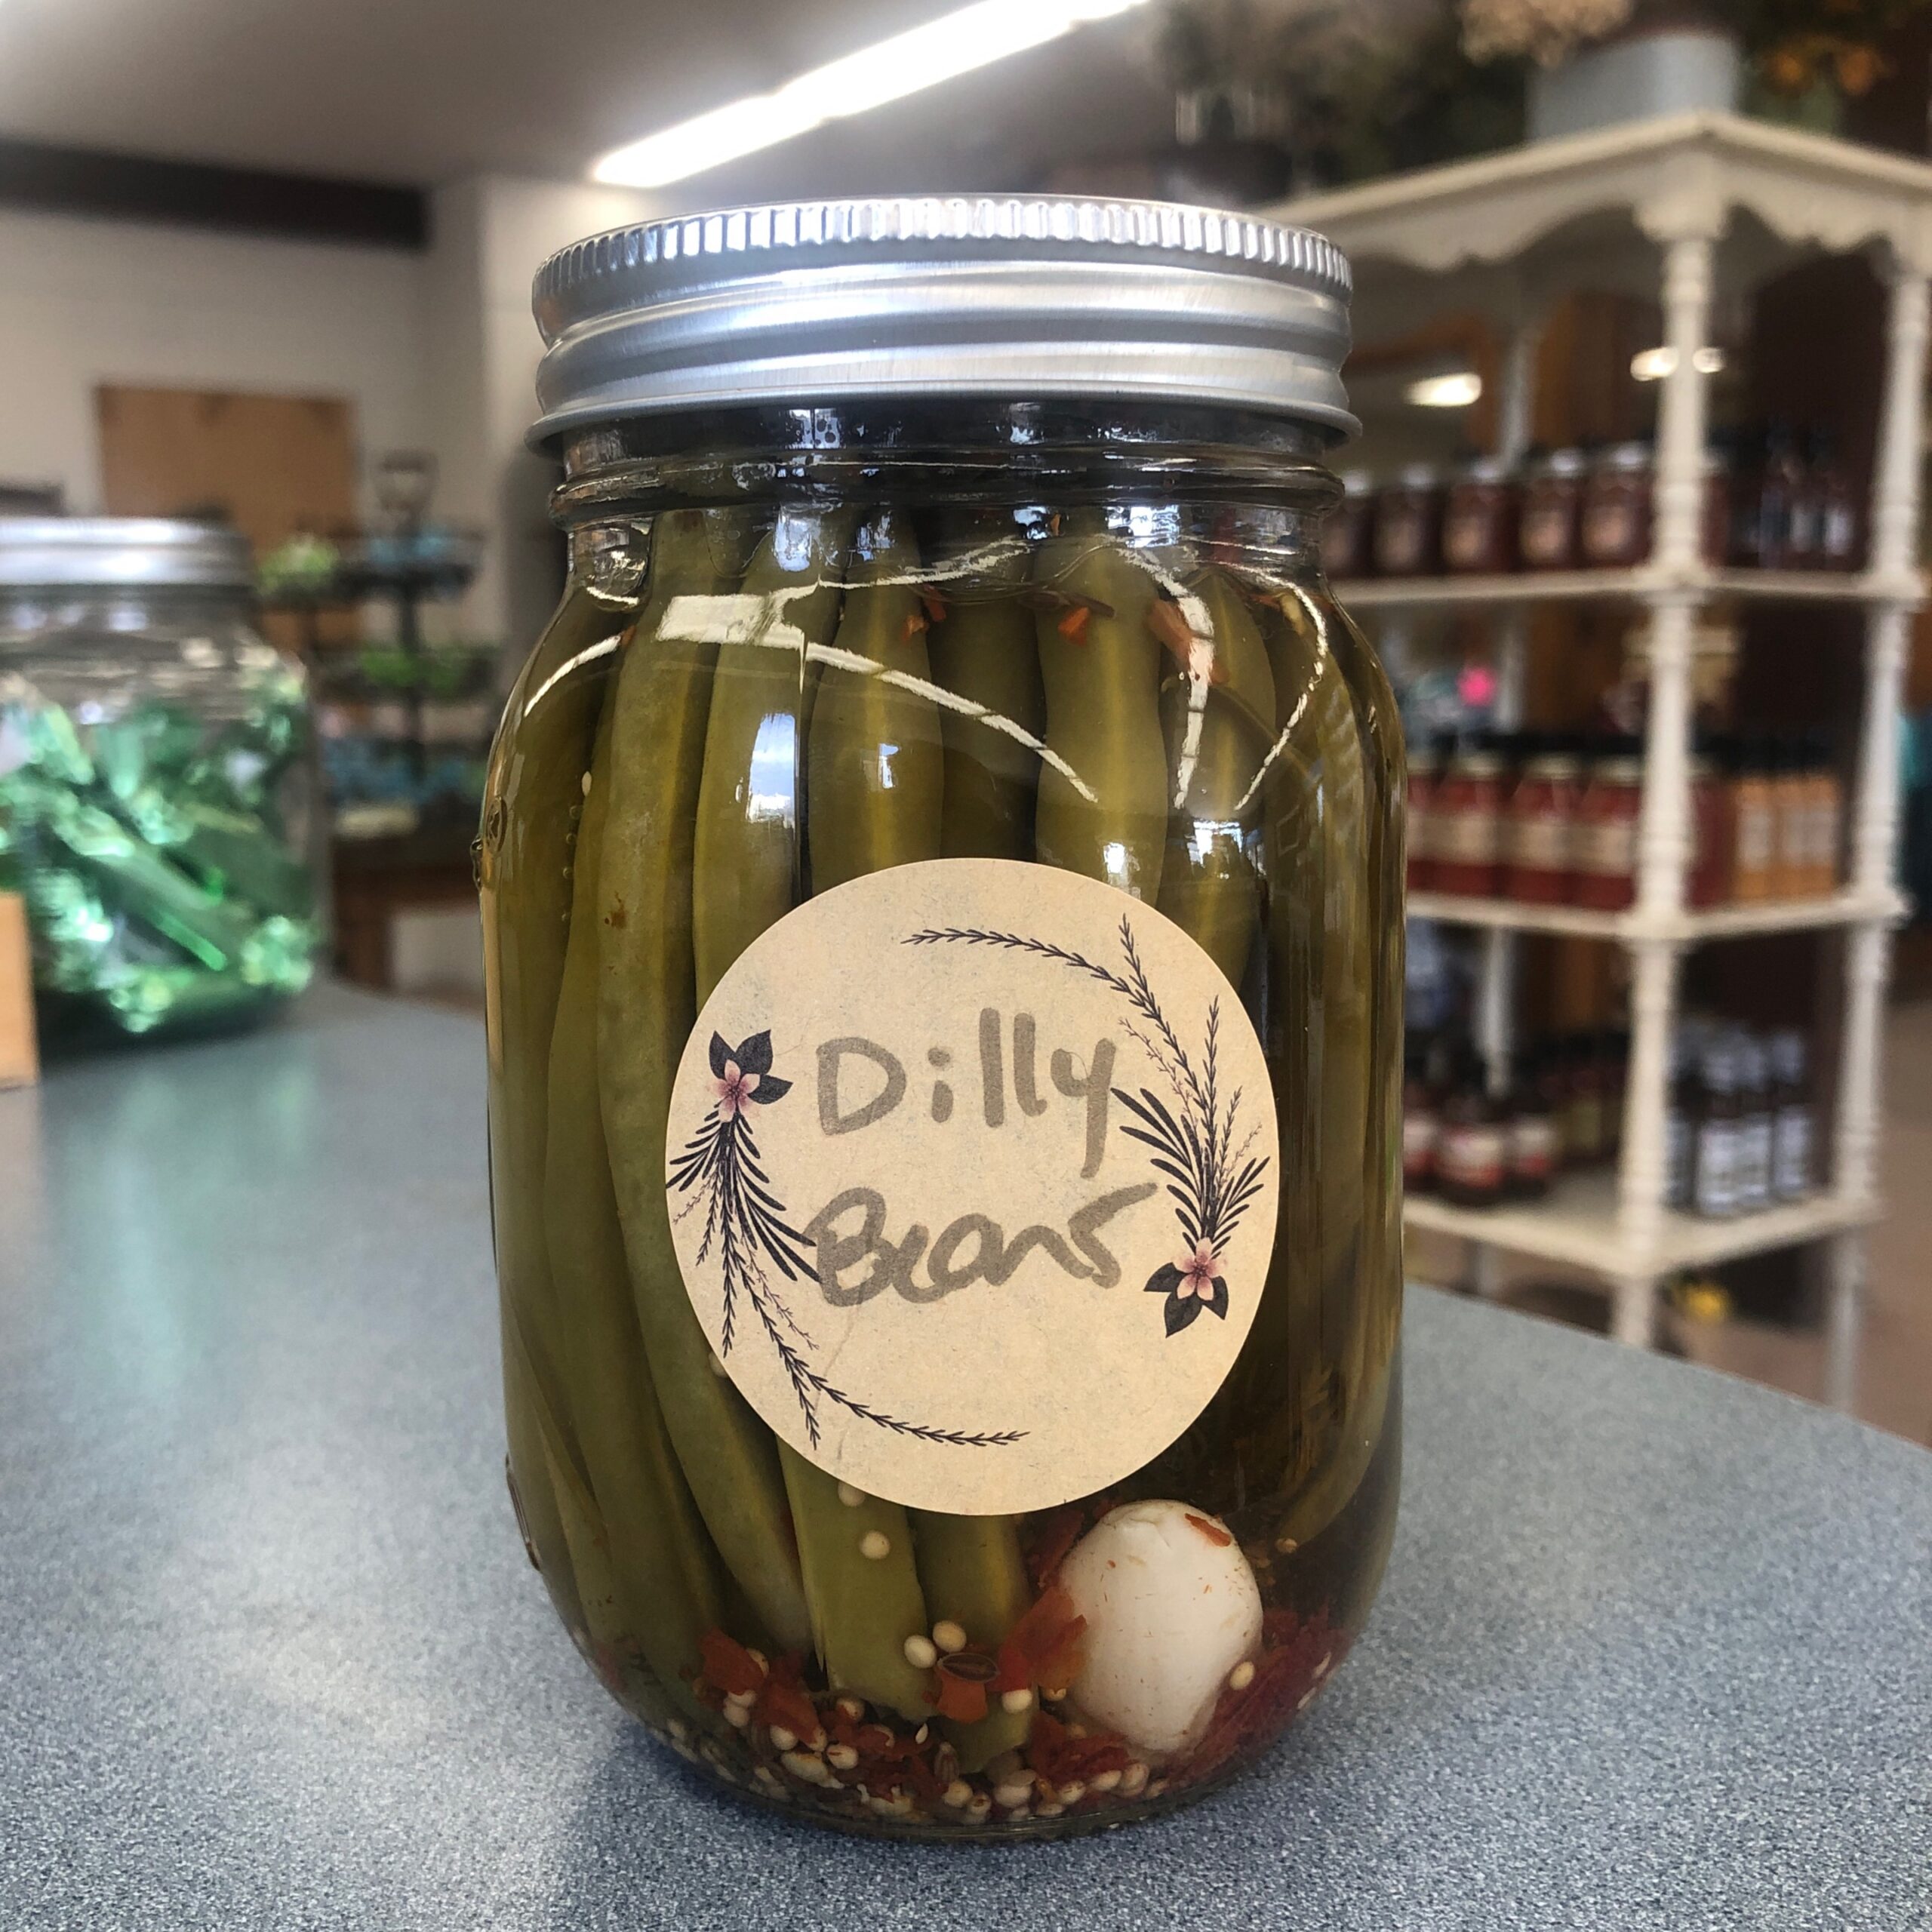 Hanna’s Homemade pickled Dilly Beans